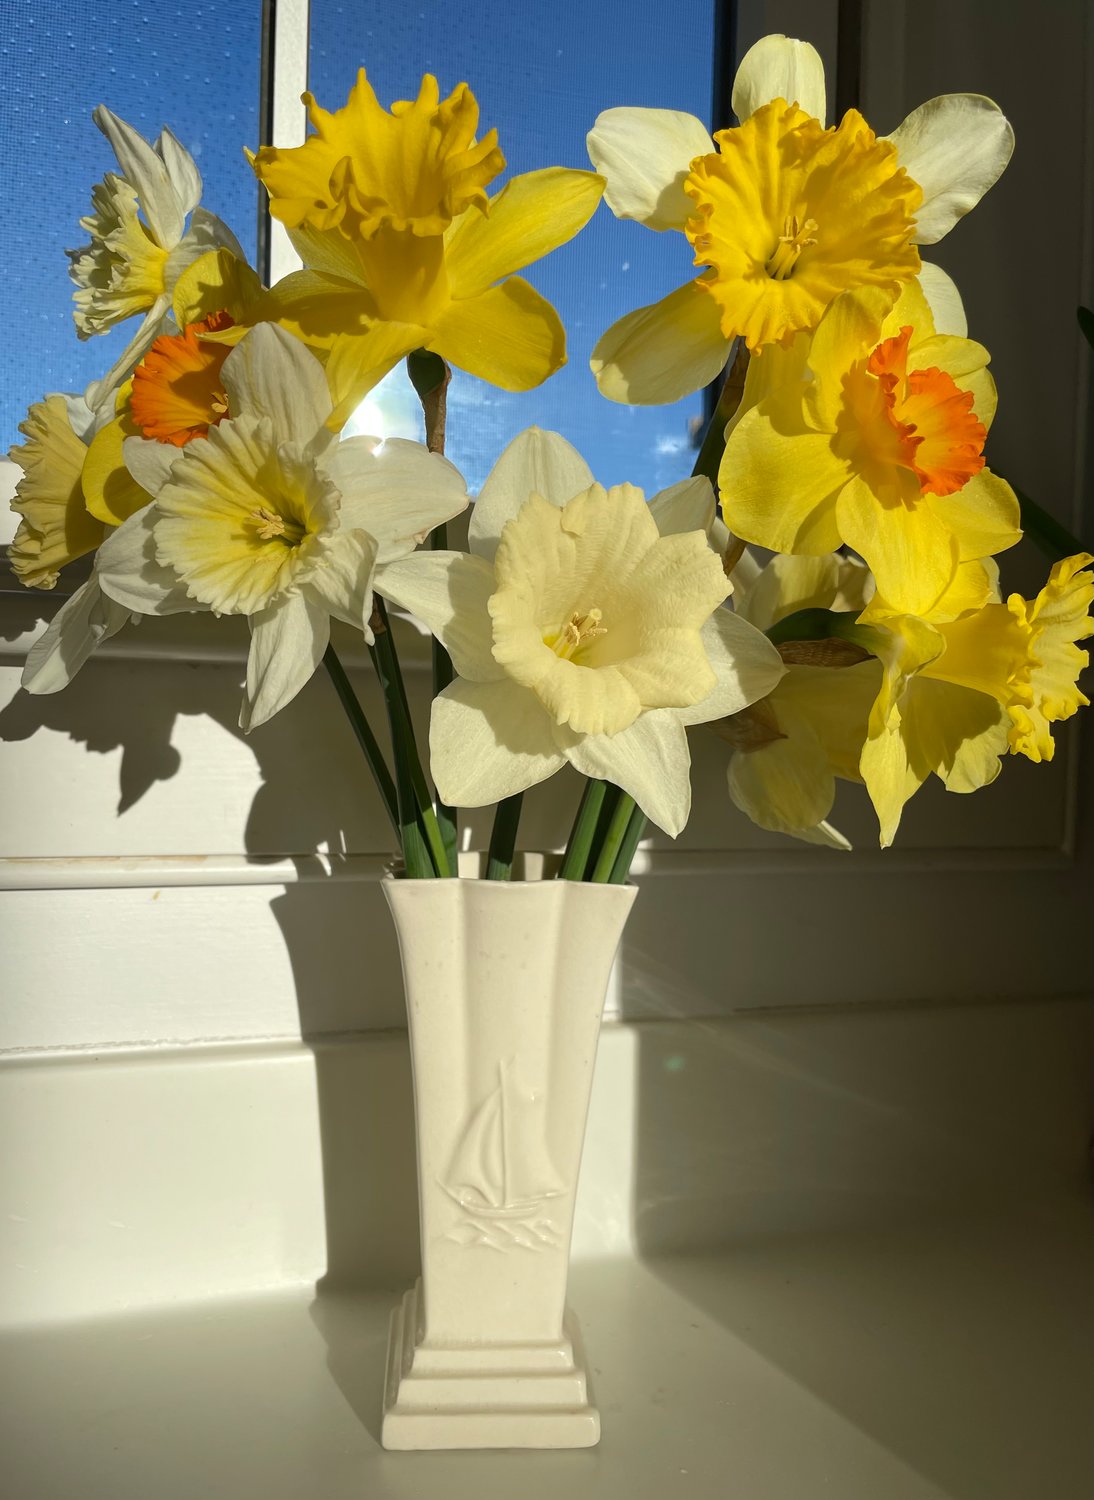 Photo by Hannah Judy.A vase of daffodils April 9.